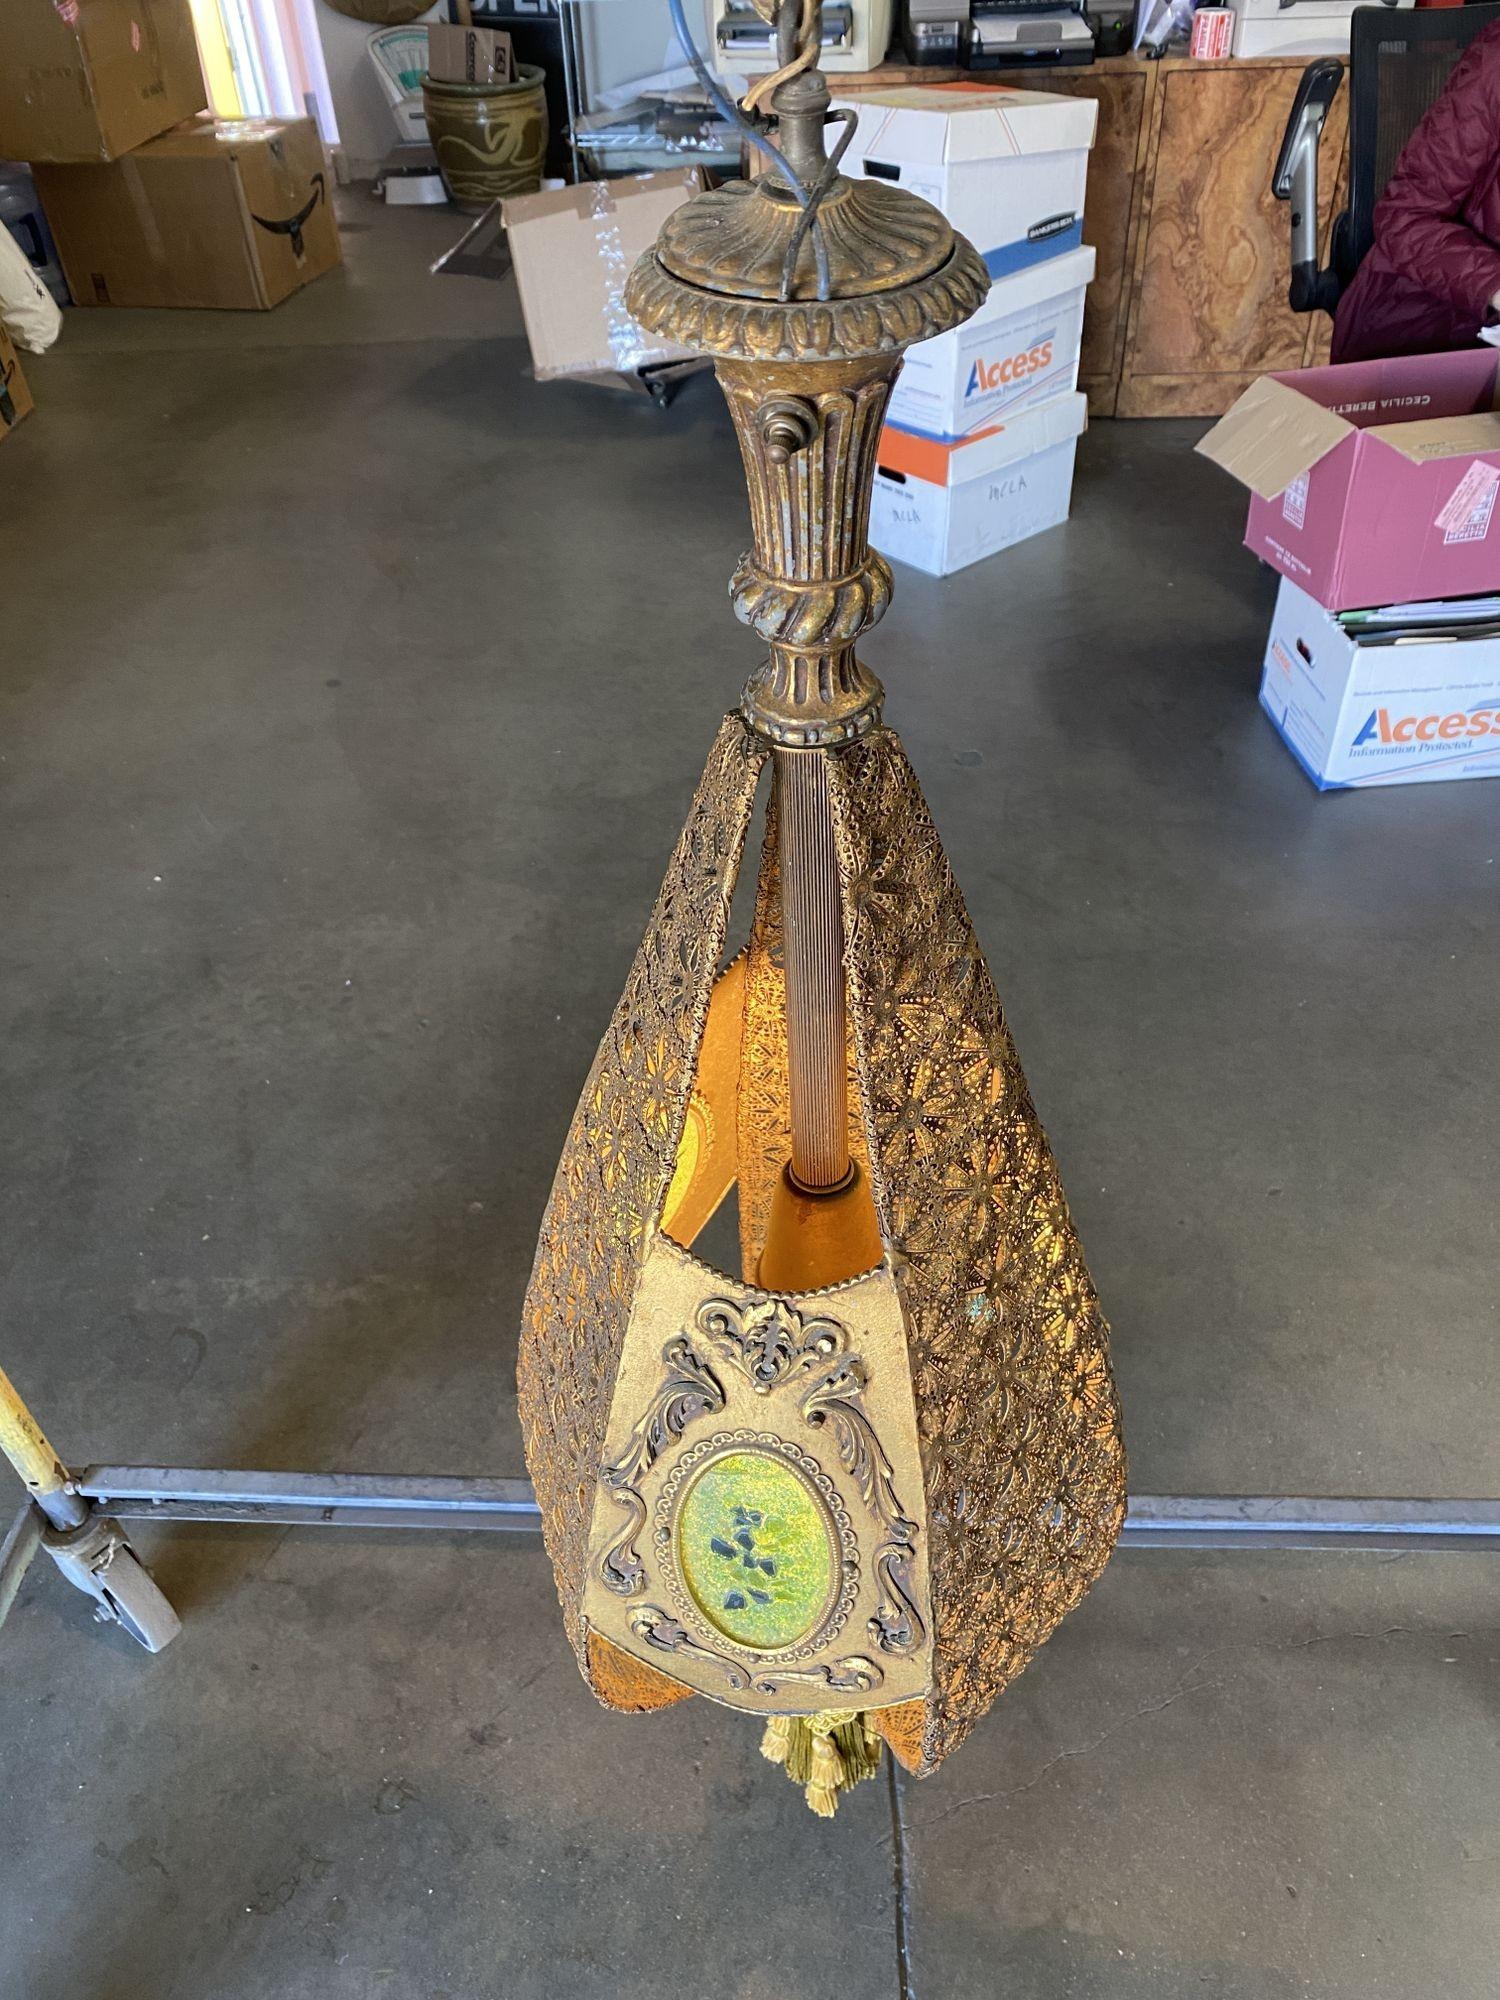 Hollywood Regency Jewel Prisms Filigree Pendant Light, Circa 1950 In Excellent Condition For Sale In Van Nuys, CA